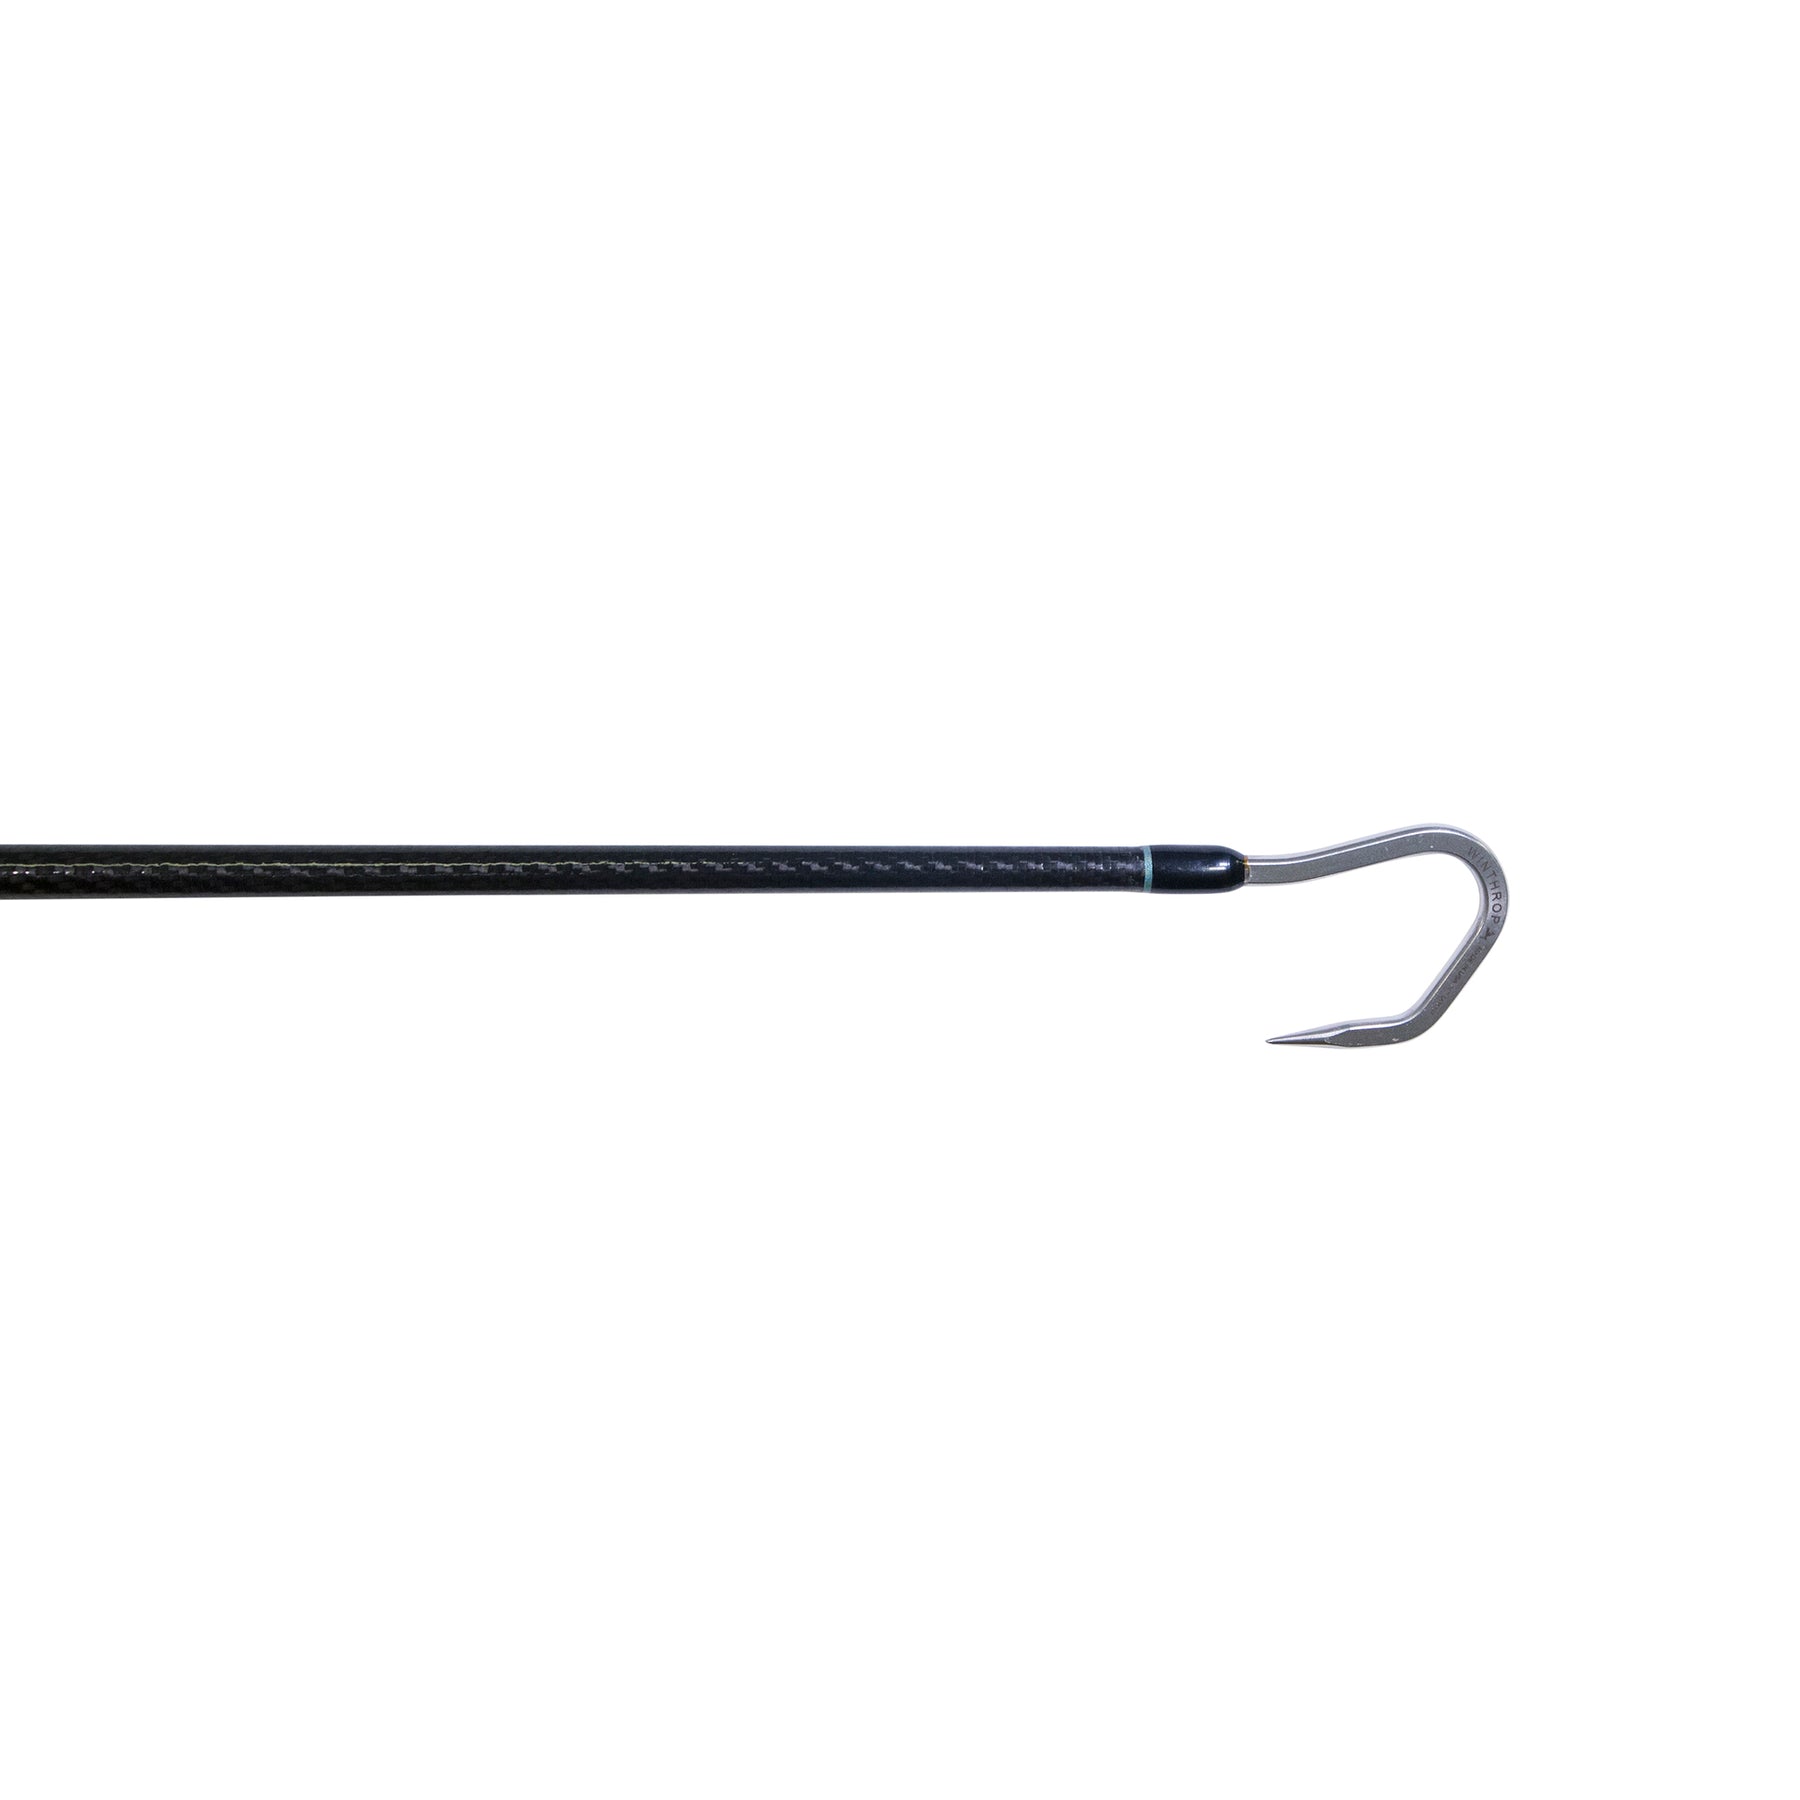 BlacktipH Live Bait Fishing Rod with Winthrop Epic Butt and Carbon Fiber  Wrap